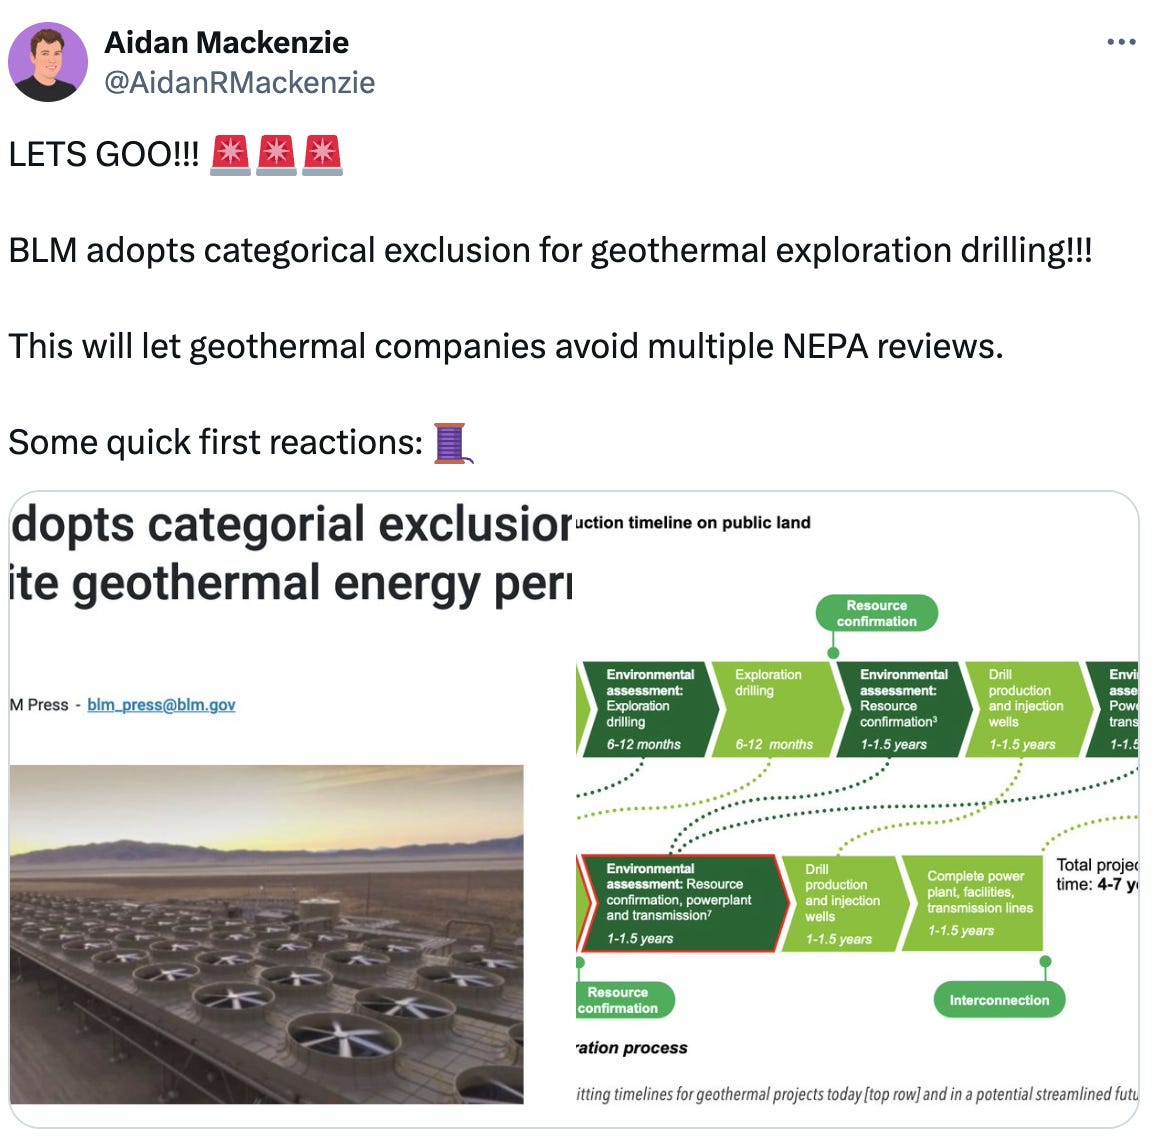  Aidan Mackenzie @AidanRMackenzie LETS GOO!!! 🚨🚨🚨  BLM adopts categorical exclusion for geothermal exploration drilling!!!   This will let geothermal companies avoid multiple NEPA reviews.   Some quick first reactions: 🧵